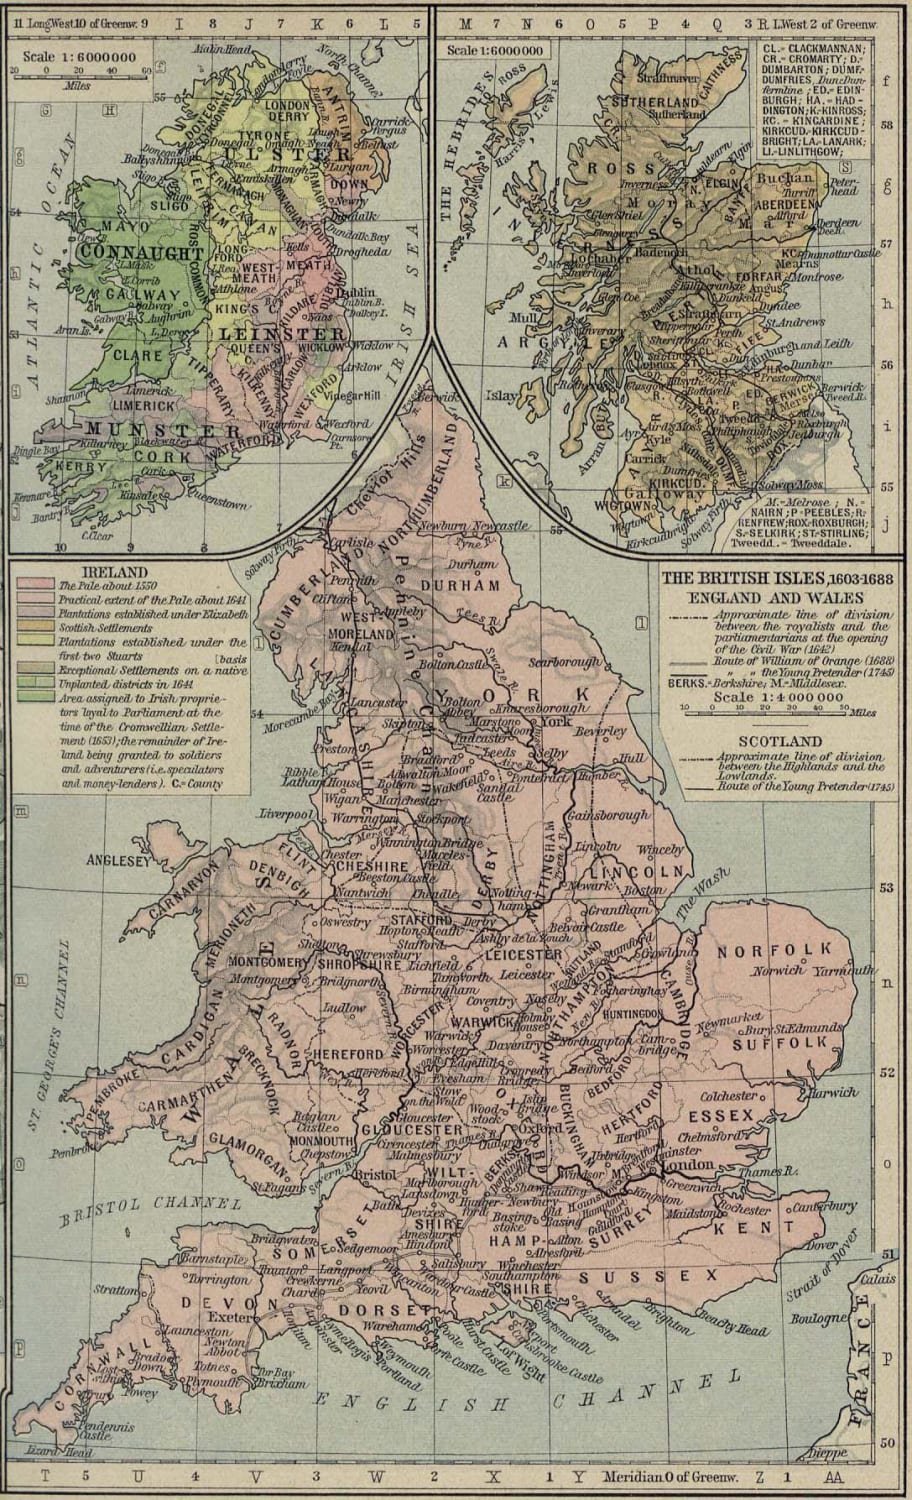 British Isles 1603-1688. From “Historical Atlas” by William R. Shepherd, New York, Henry Holt and Company, 1923.